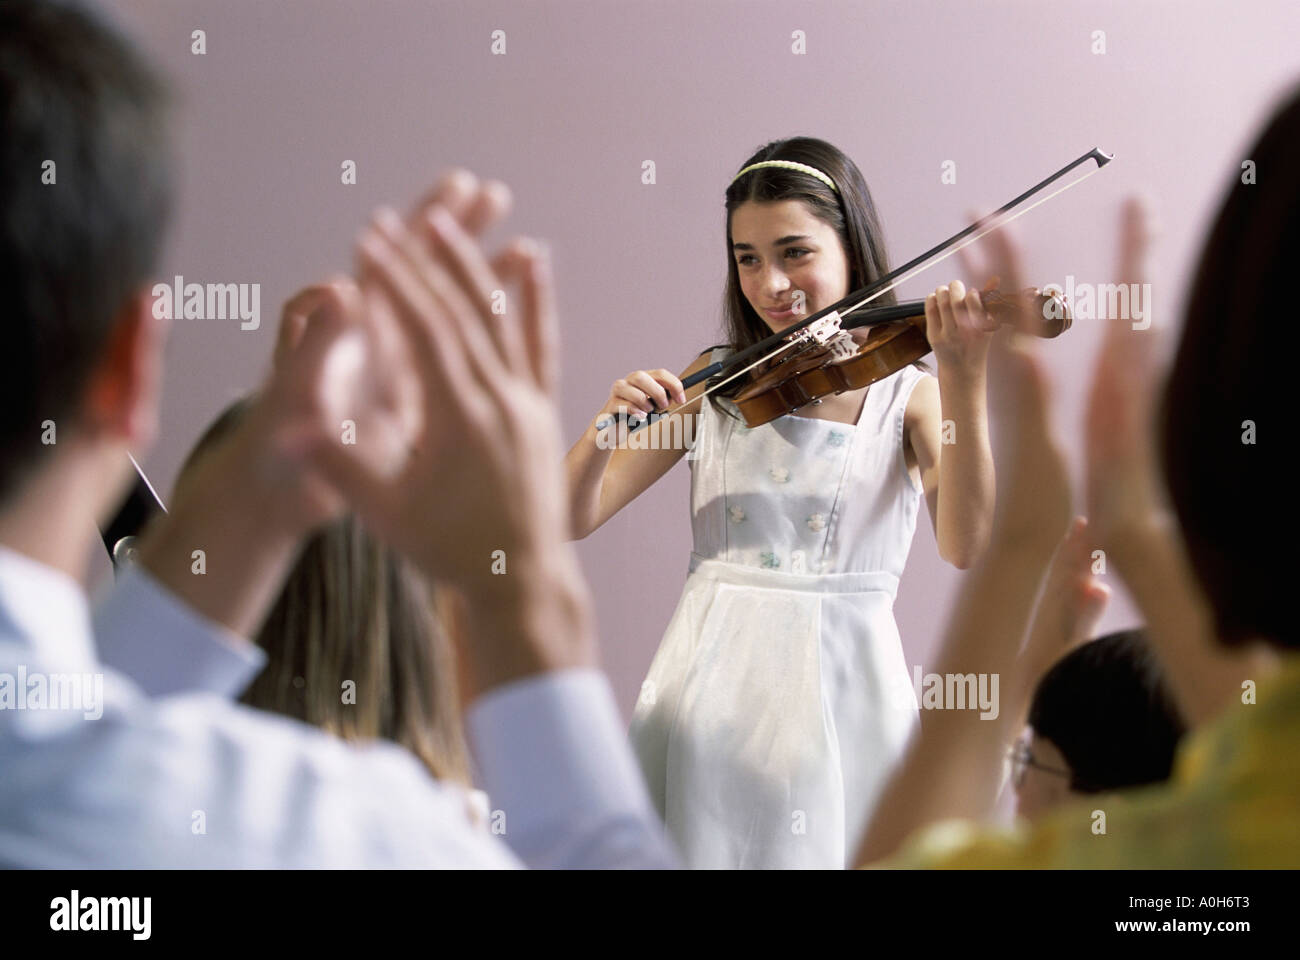 Girl playing a violin in front of an audience Stock Photo